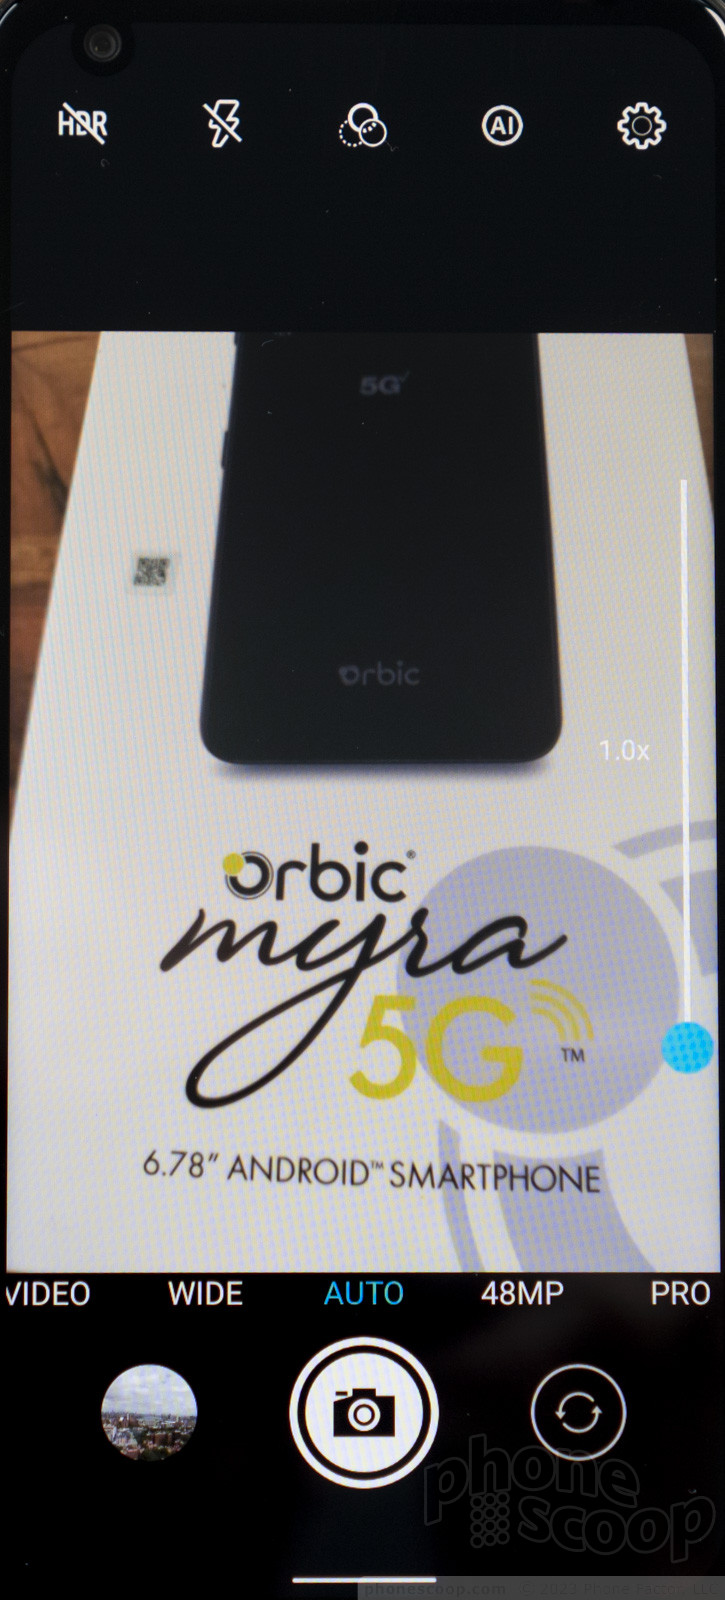 Hands On with the Orbic Myra 5G for Verizon (Phone Scoop)